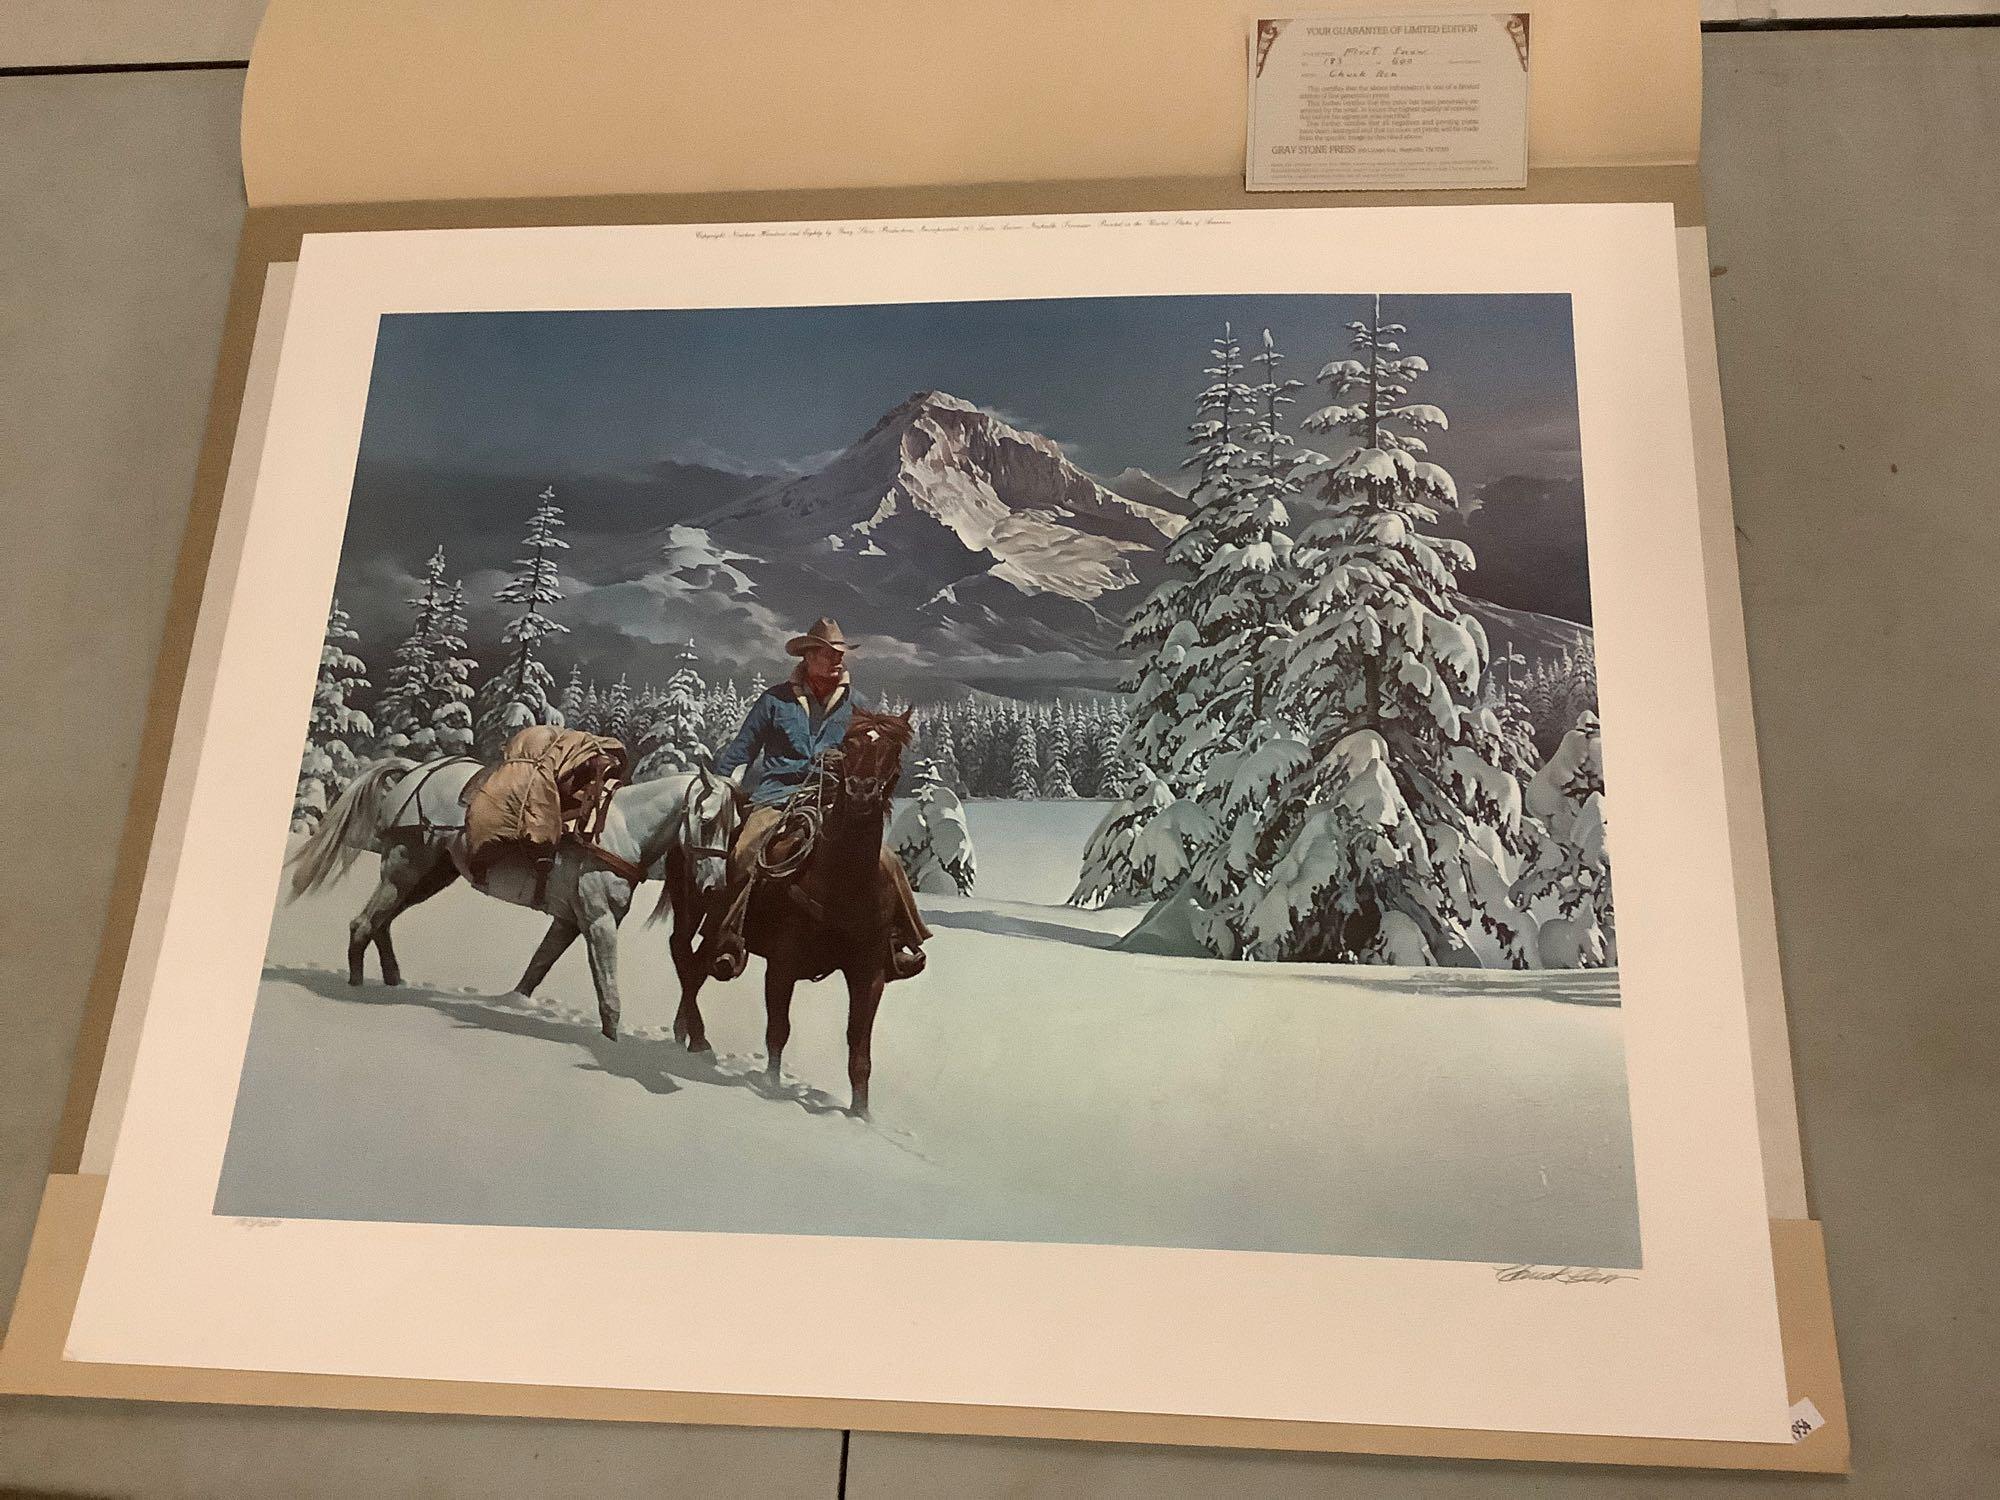 Chuck Ren limited edition & #'d 183/600 print - signed by that artist - "First Snow"